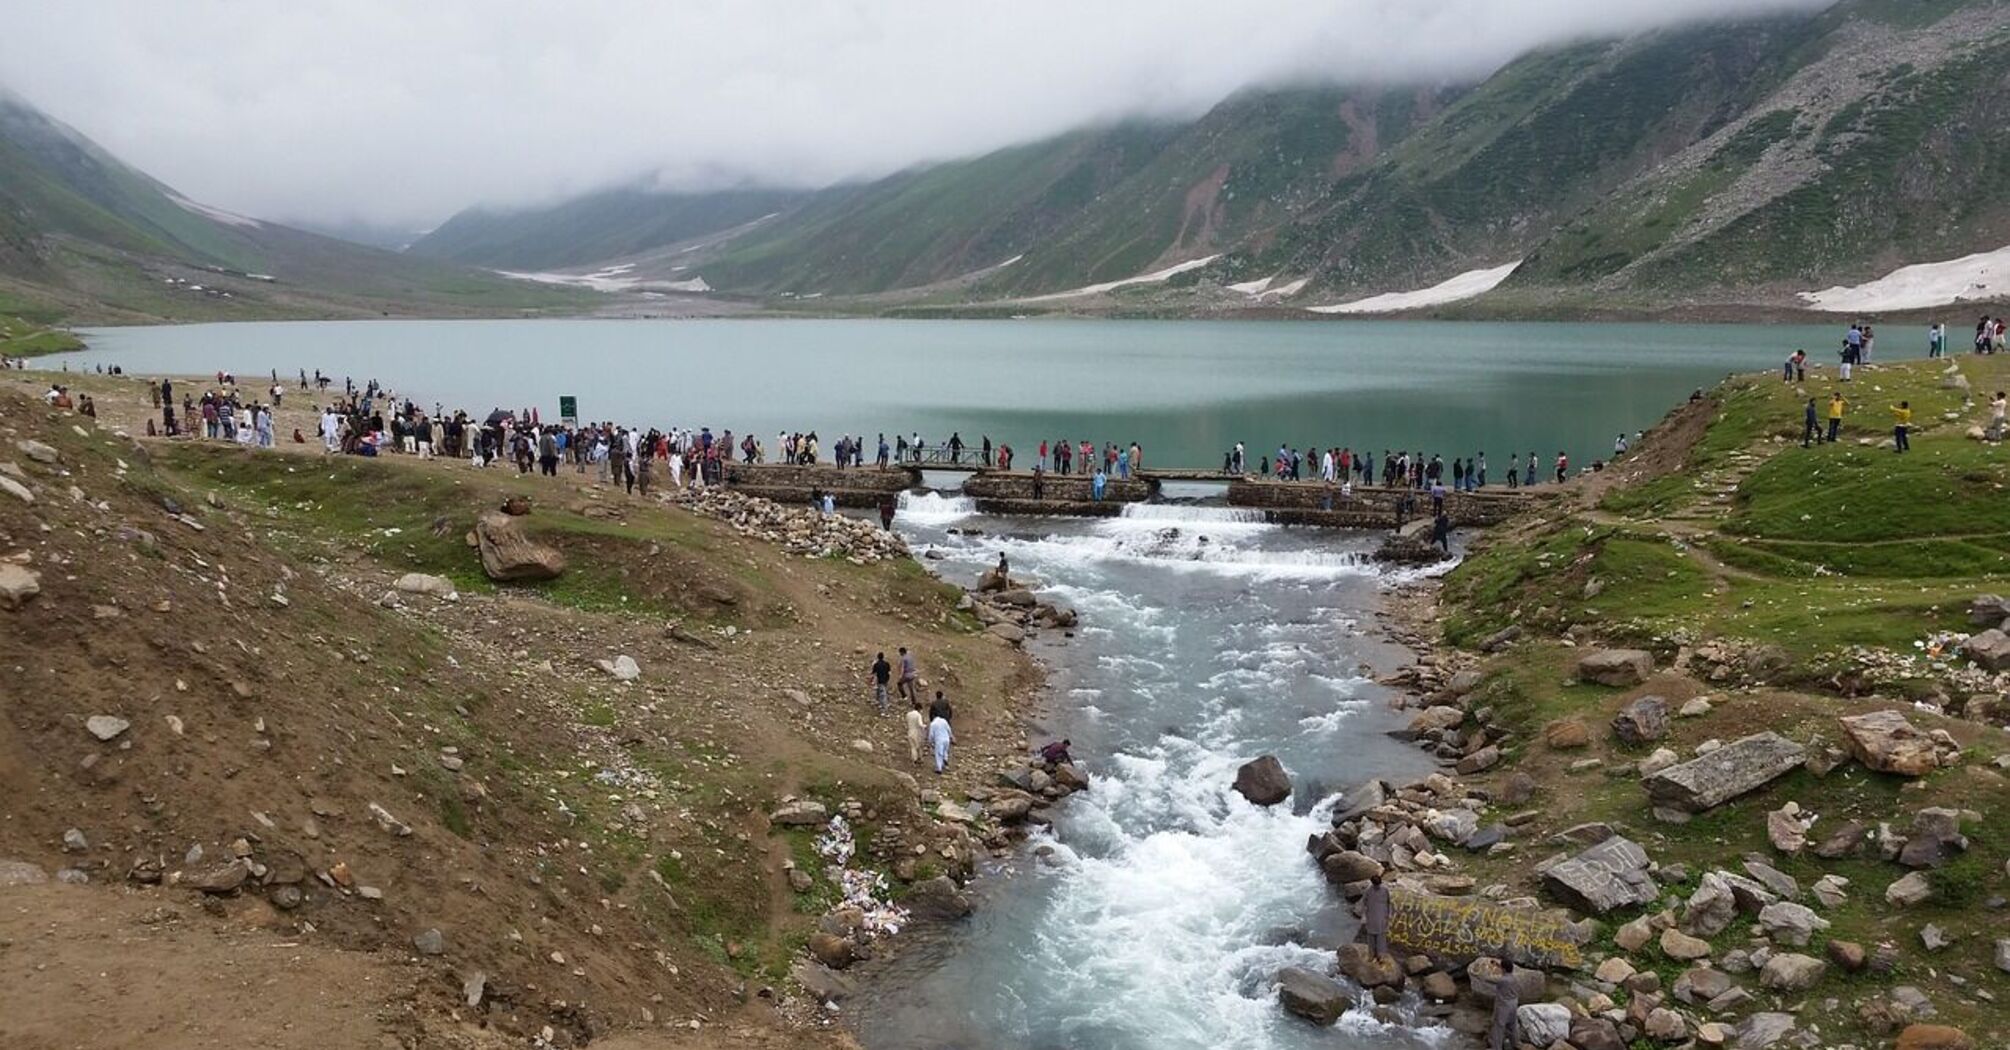 Galyat became the main tourist destination in Pakistan in 2023